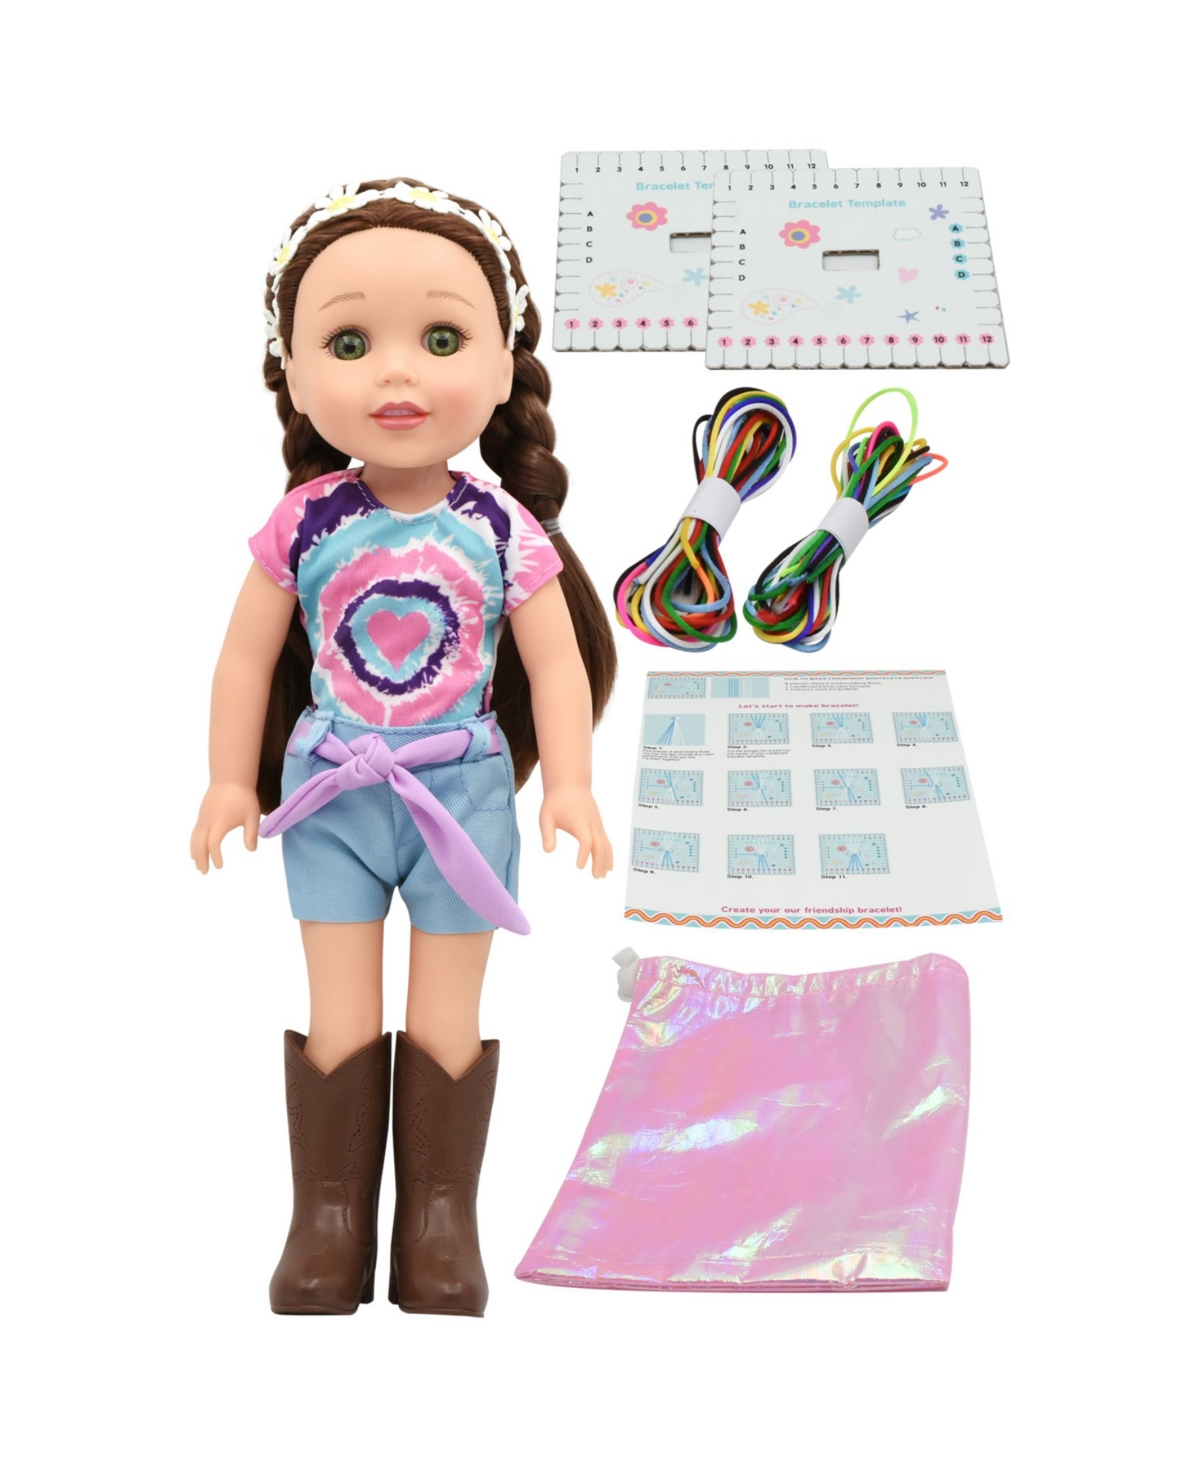 Style Dreamers Friendship Bracelet Play Set With Doll, 7 Piece In Multi